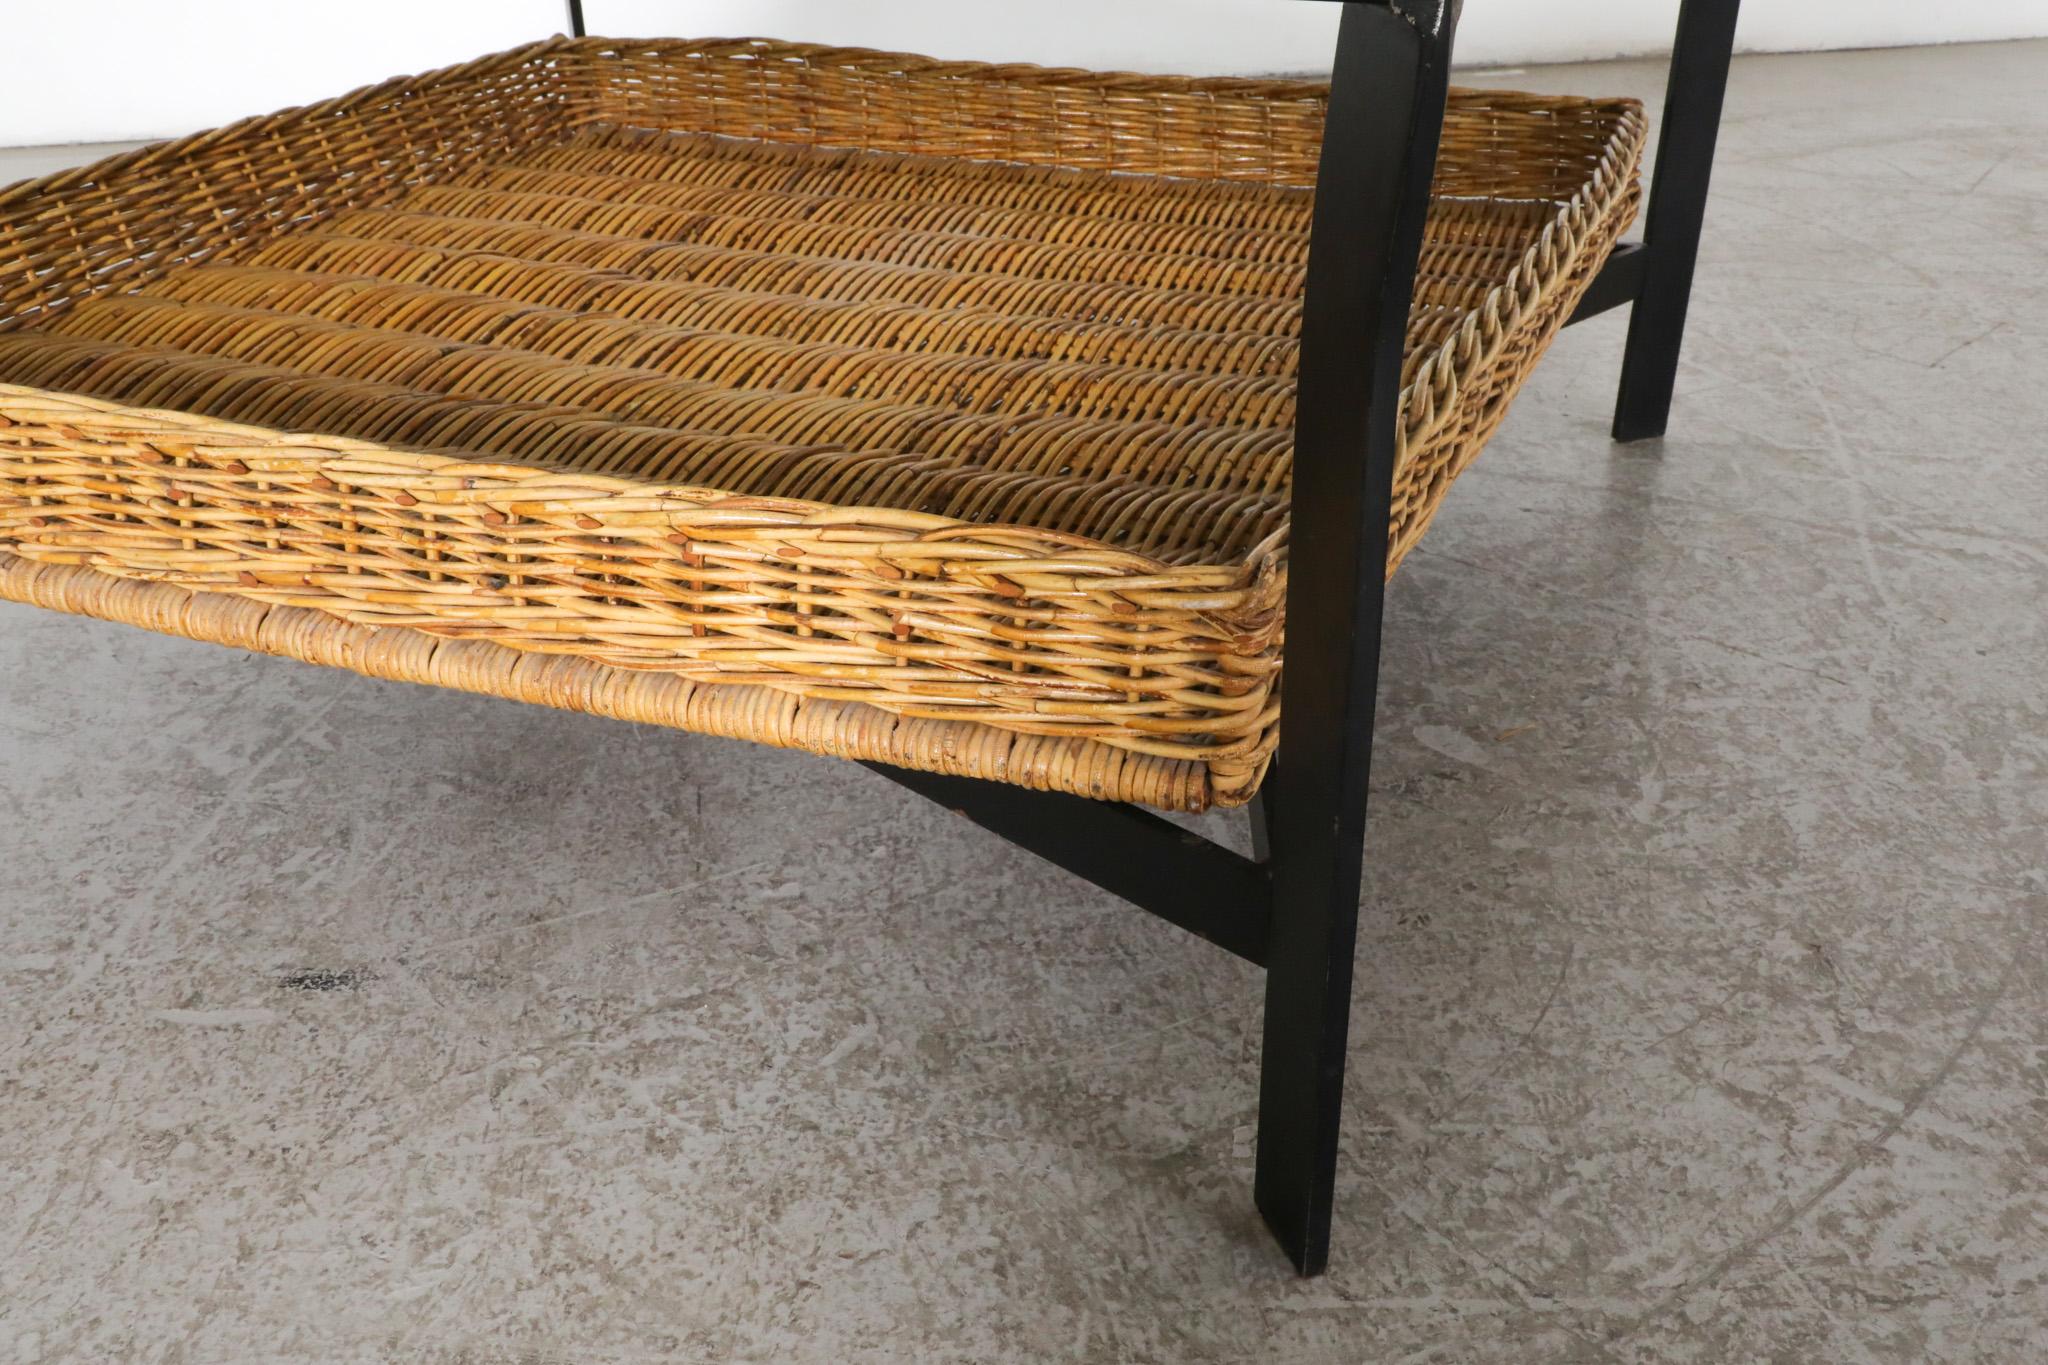 Modernist Rattan Metal and Glass Coffee Table with Lower Basket For Sale 6